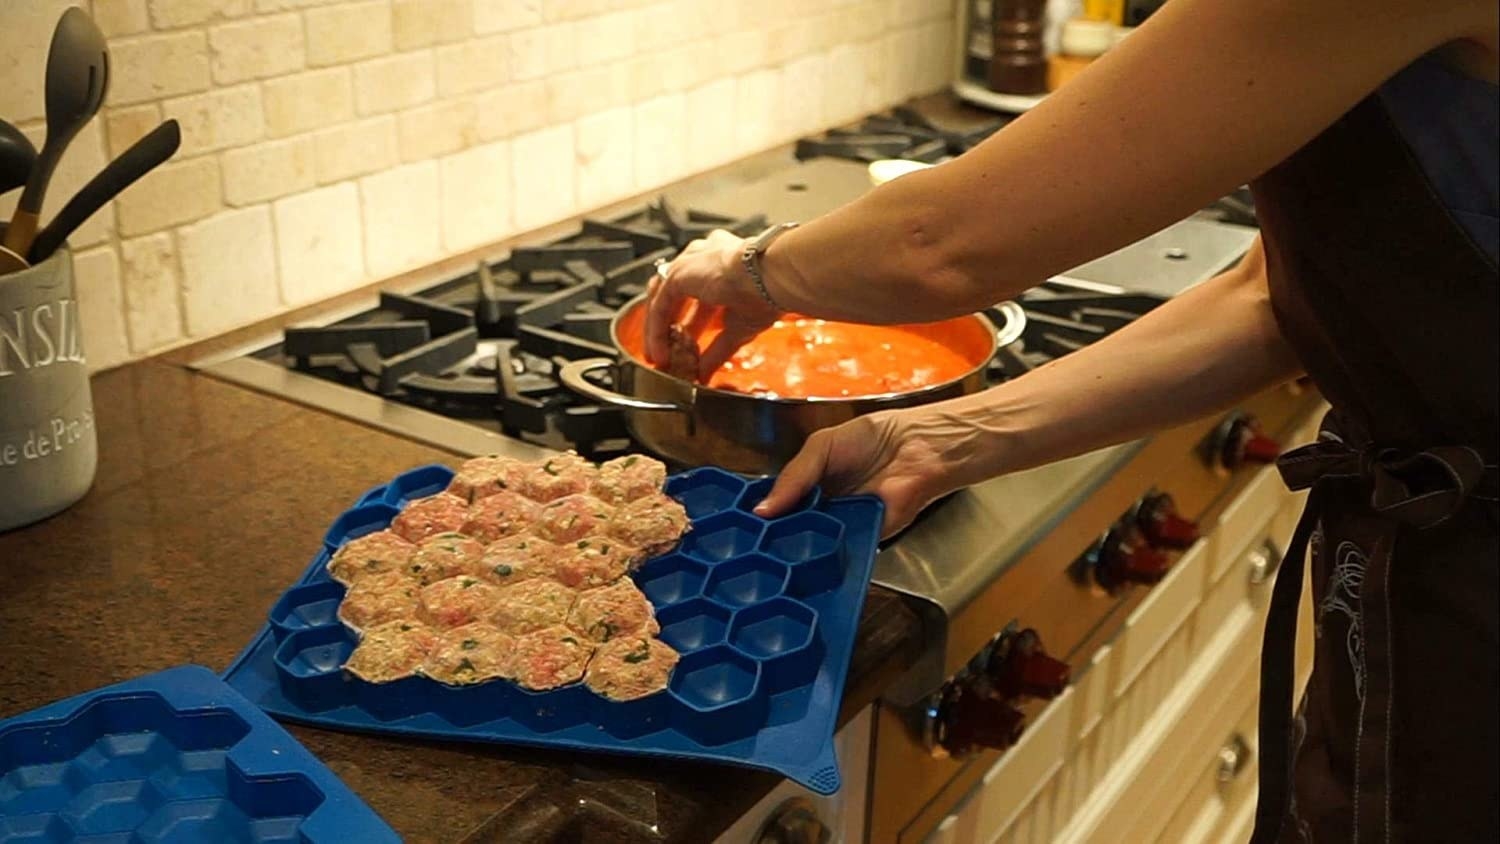 A person removes meatballs from the silicone mould